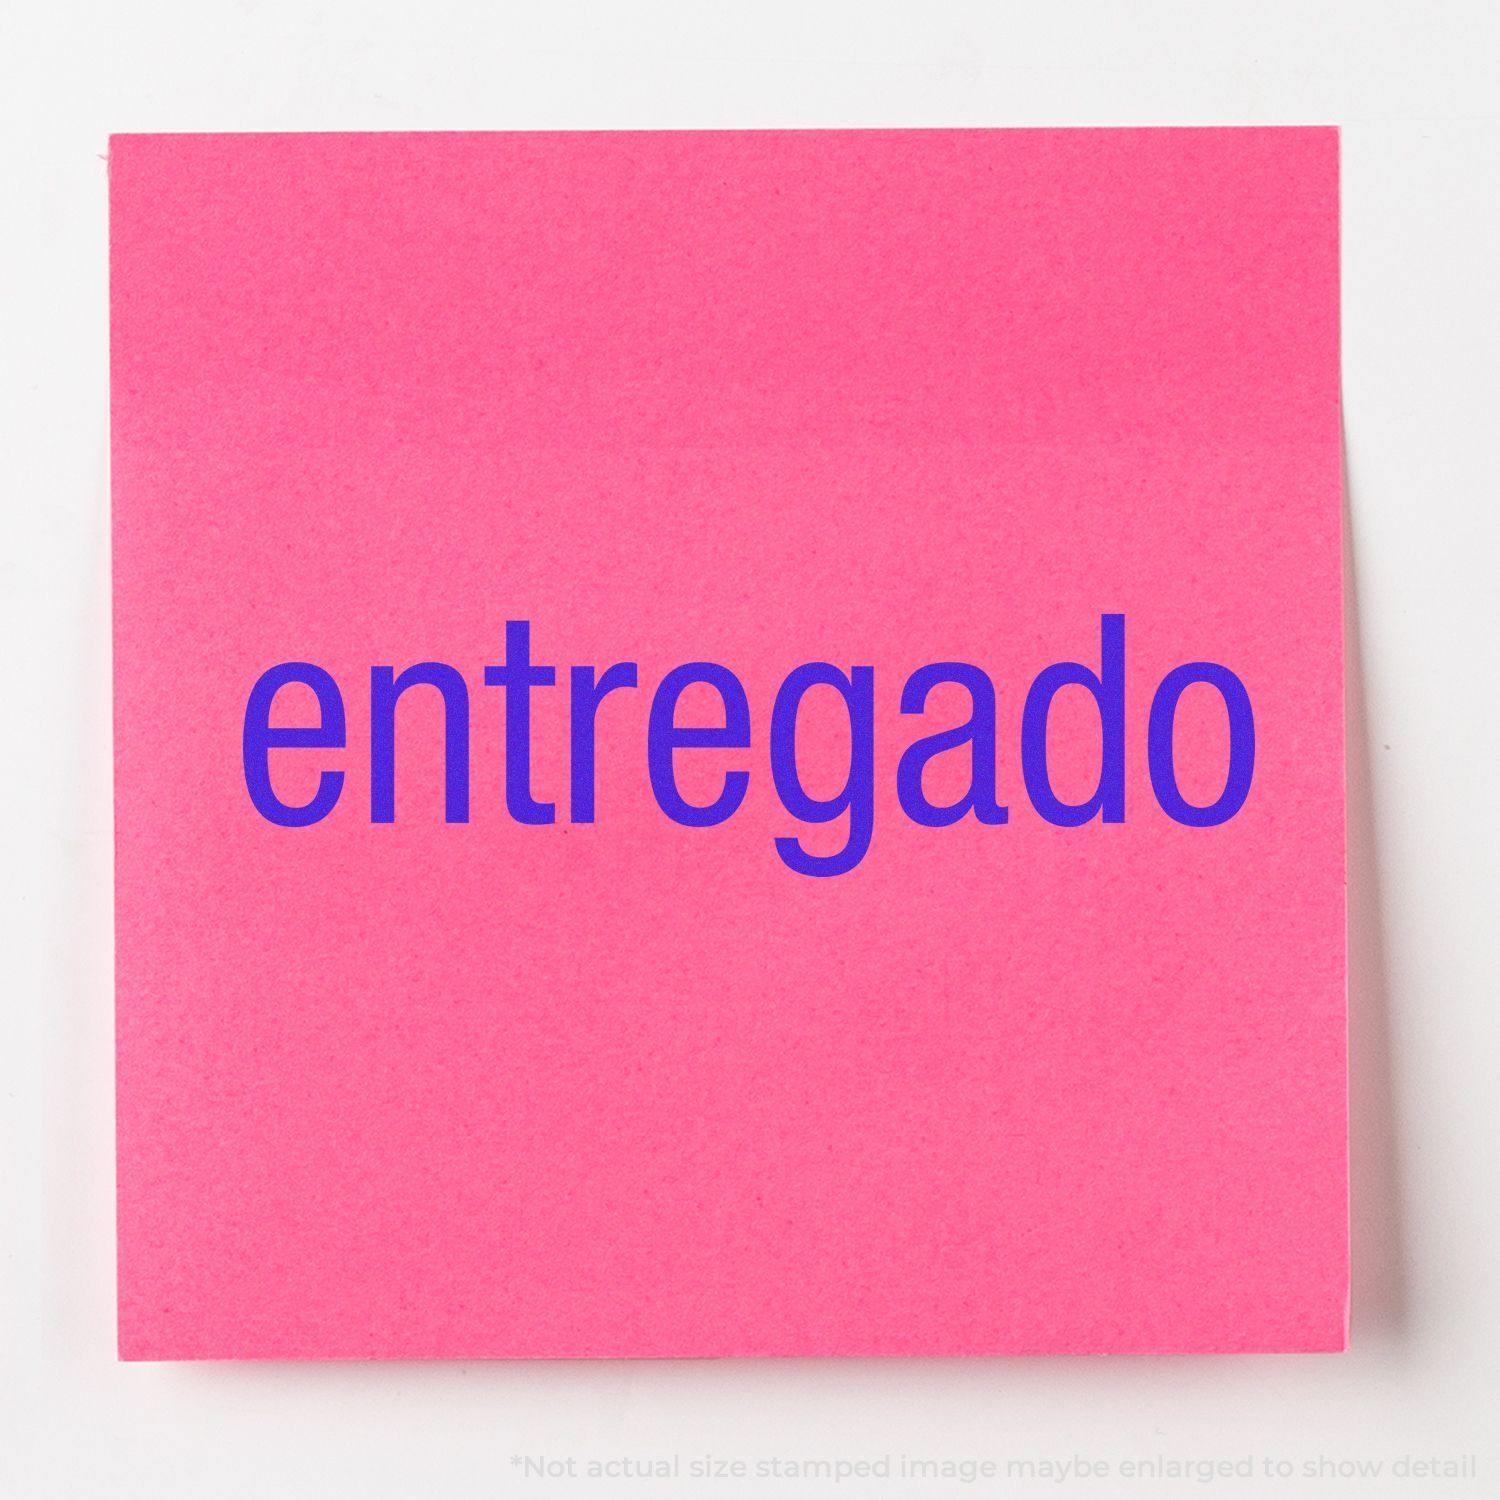 A self-inking stamp with a stamped image showing how the text "entregado" in a large font is displayed by it after stamping.